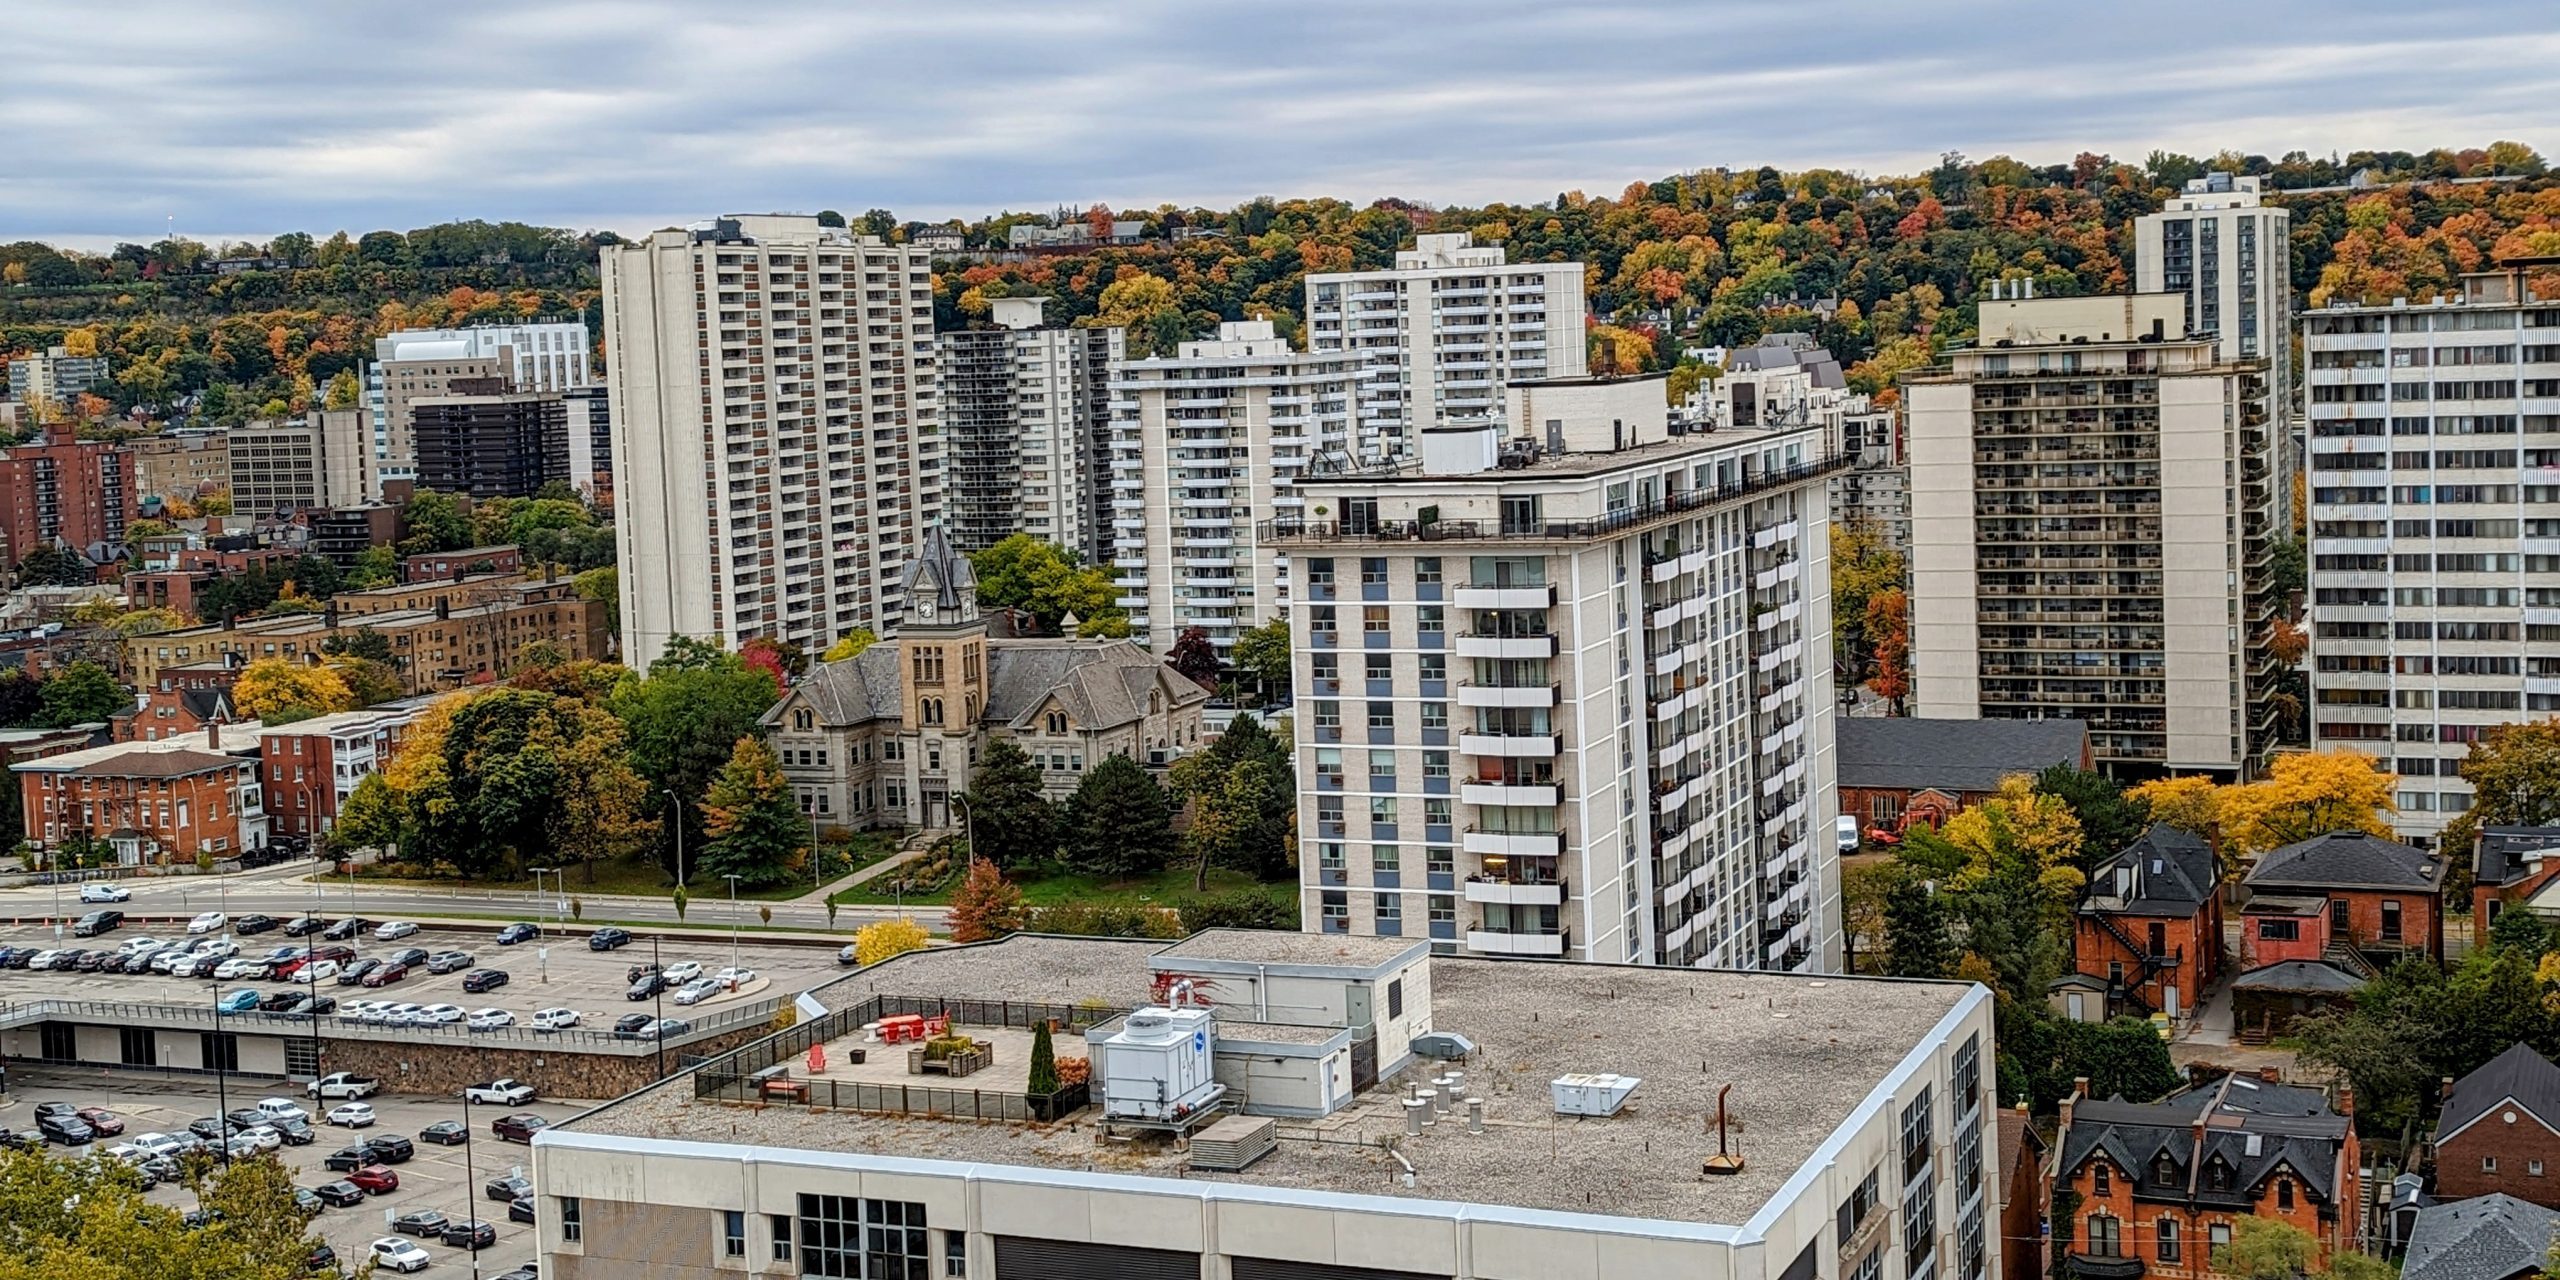 Is it cheaper to own or rent a home in Hamilton right now?